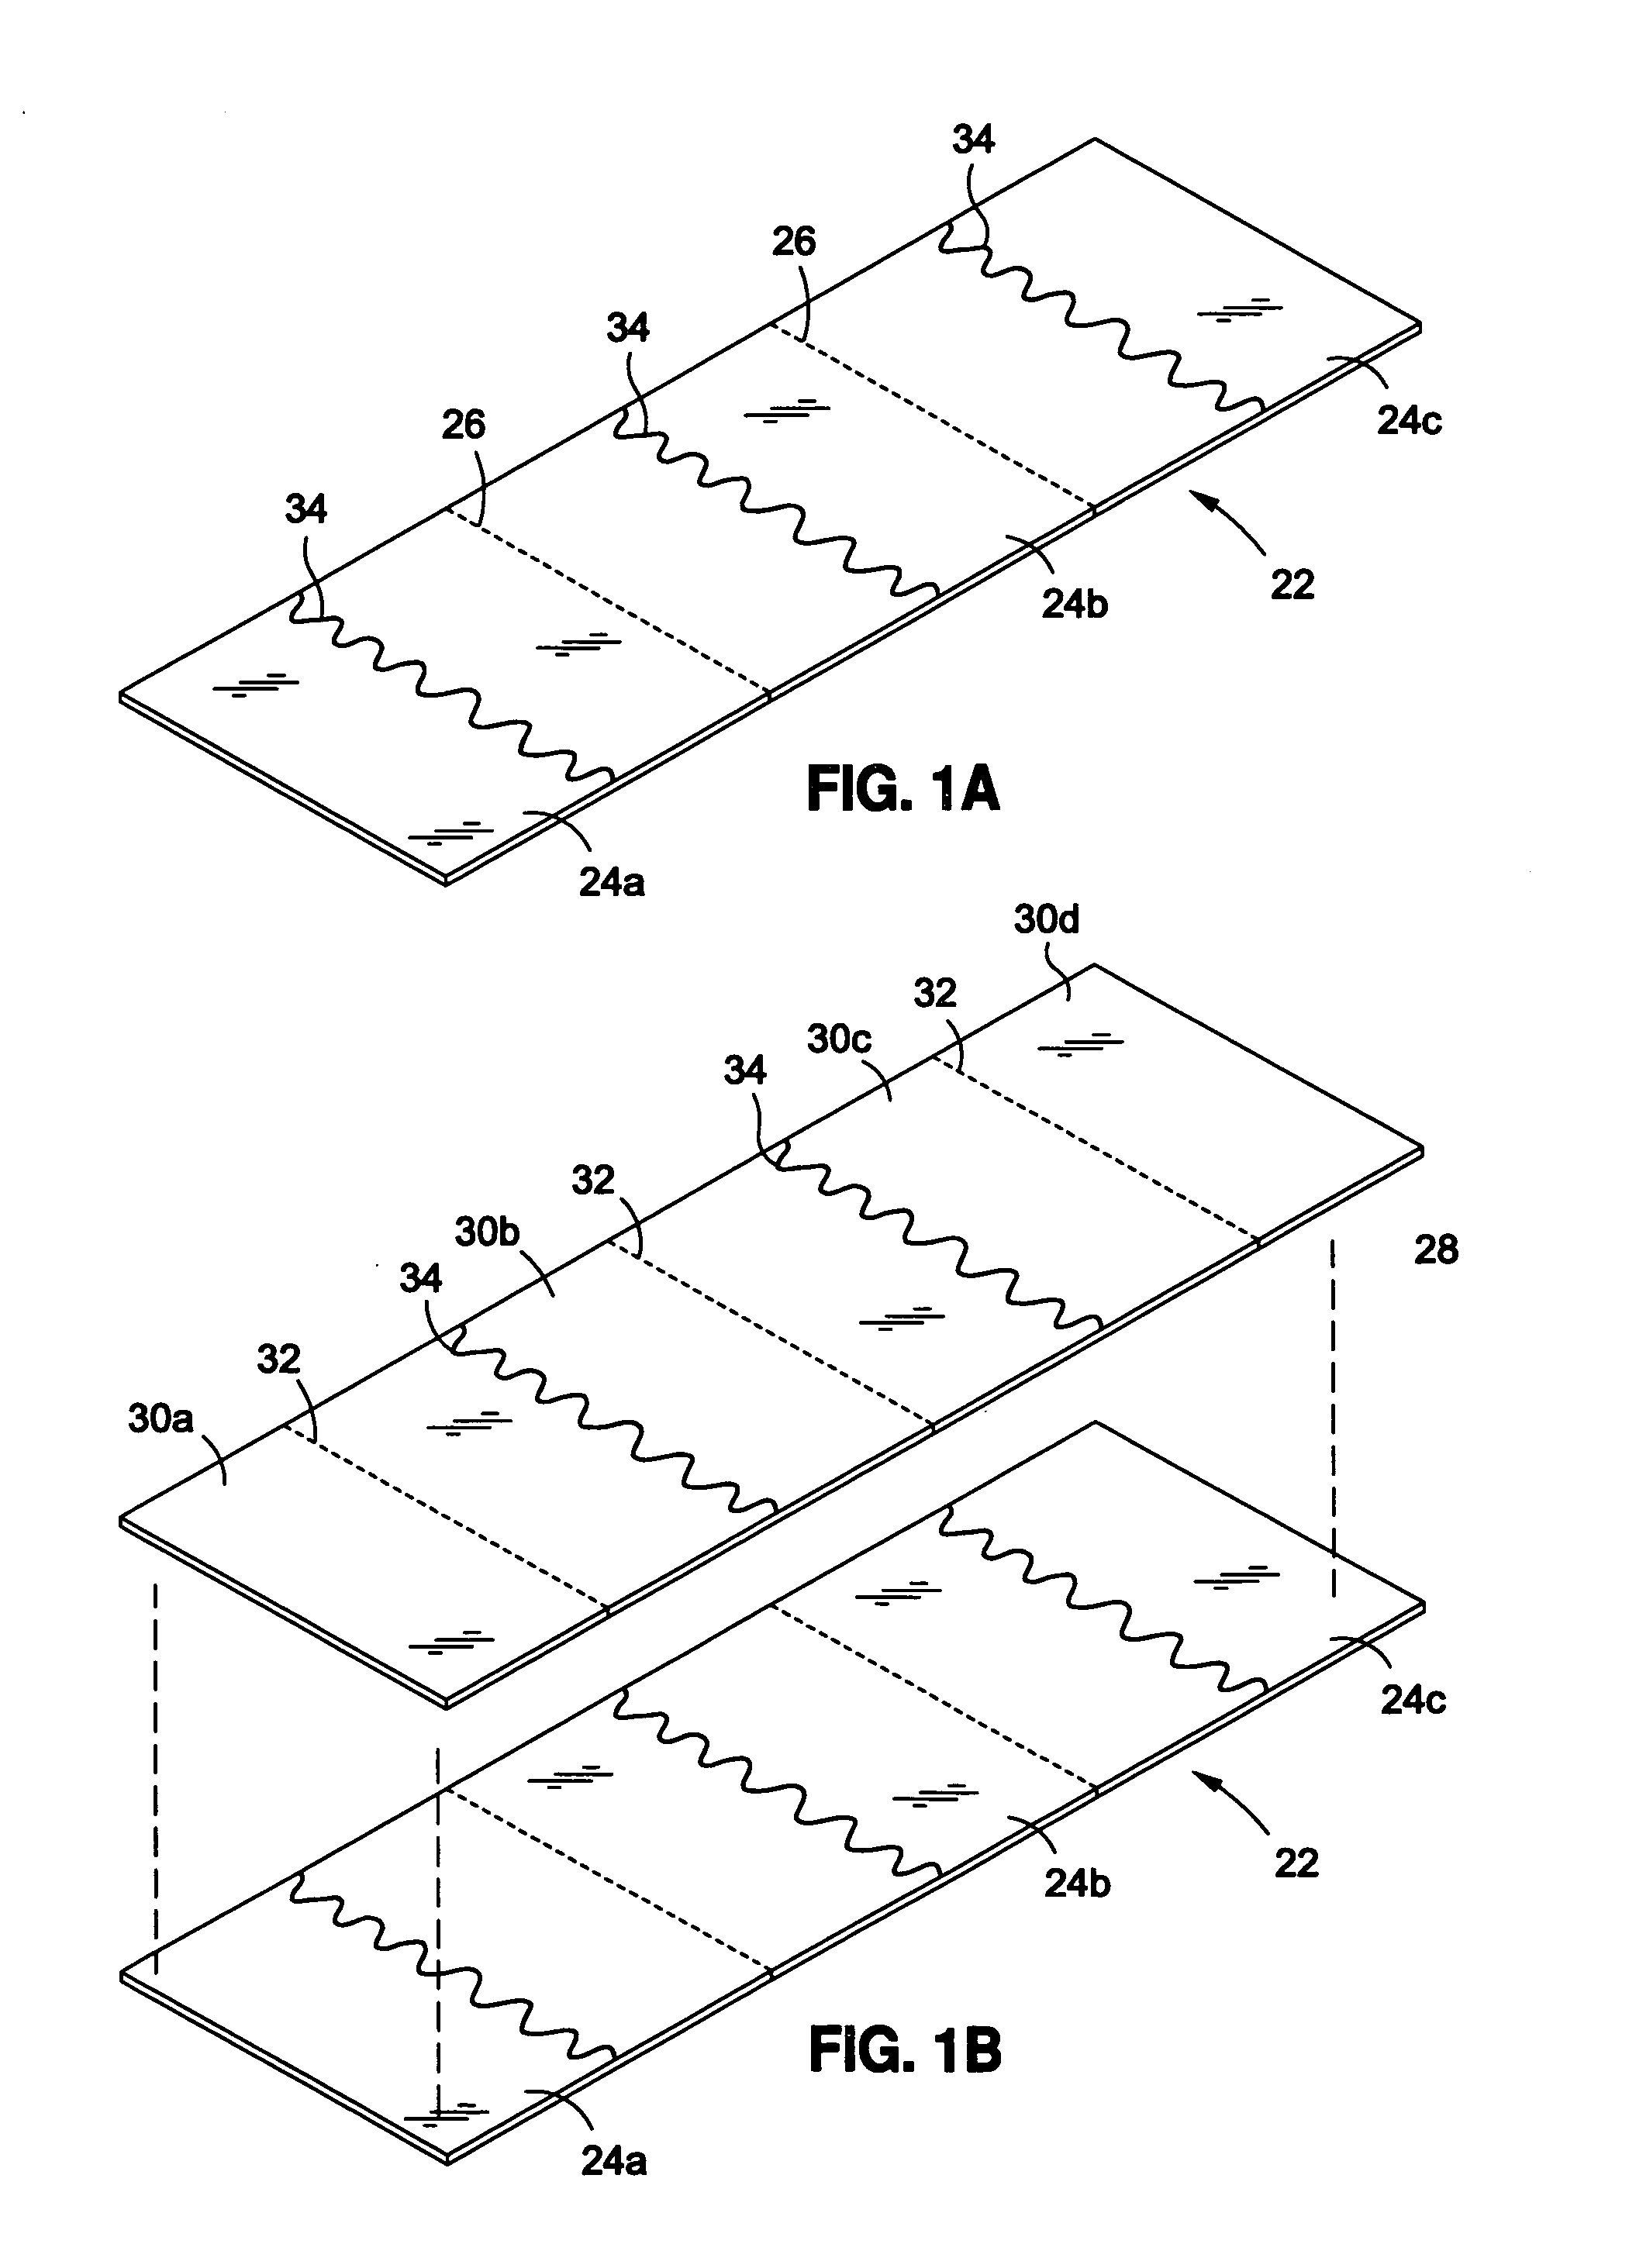 Building panel having plant-imitating structural core